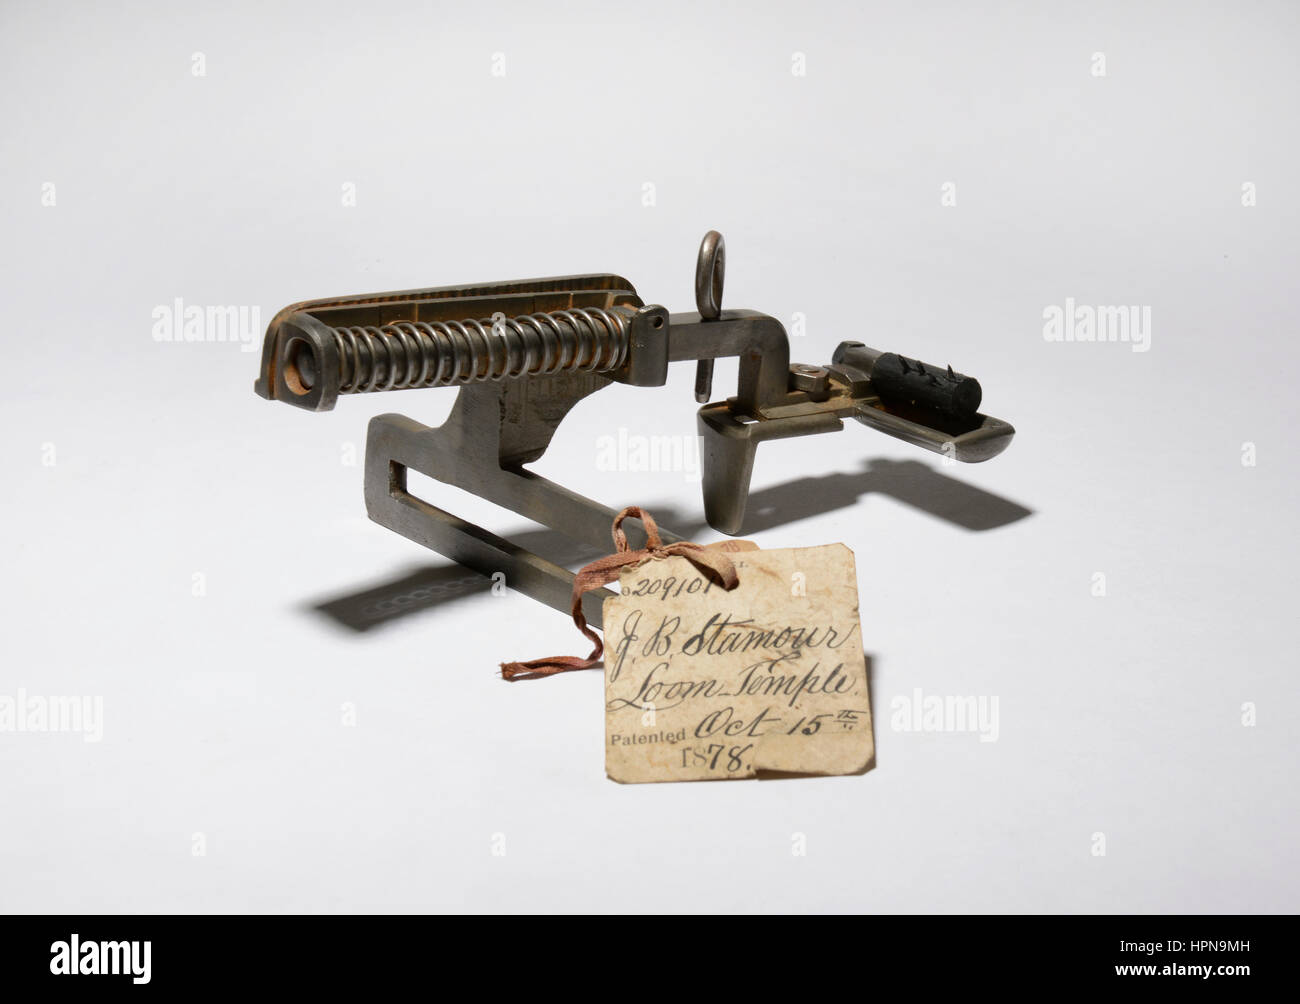 Patent model of an improved Loom-temple machine invented by J. B. Stamour, granted US Patent number 209101 on October 15, 1878. Stock Photo